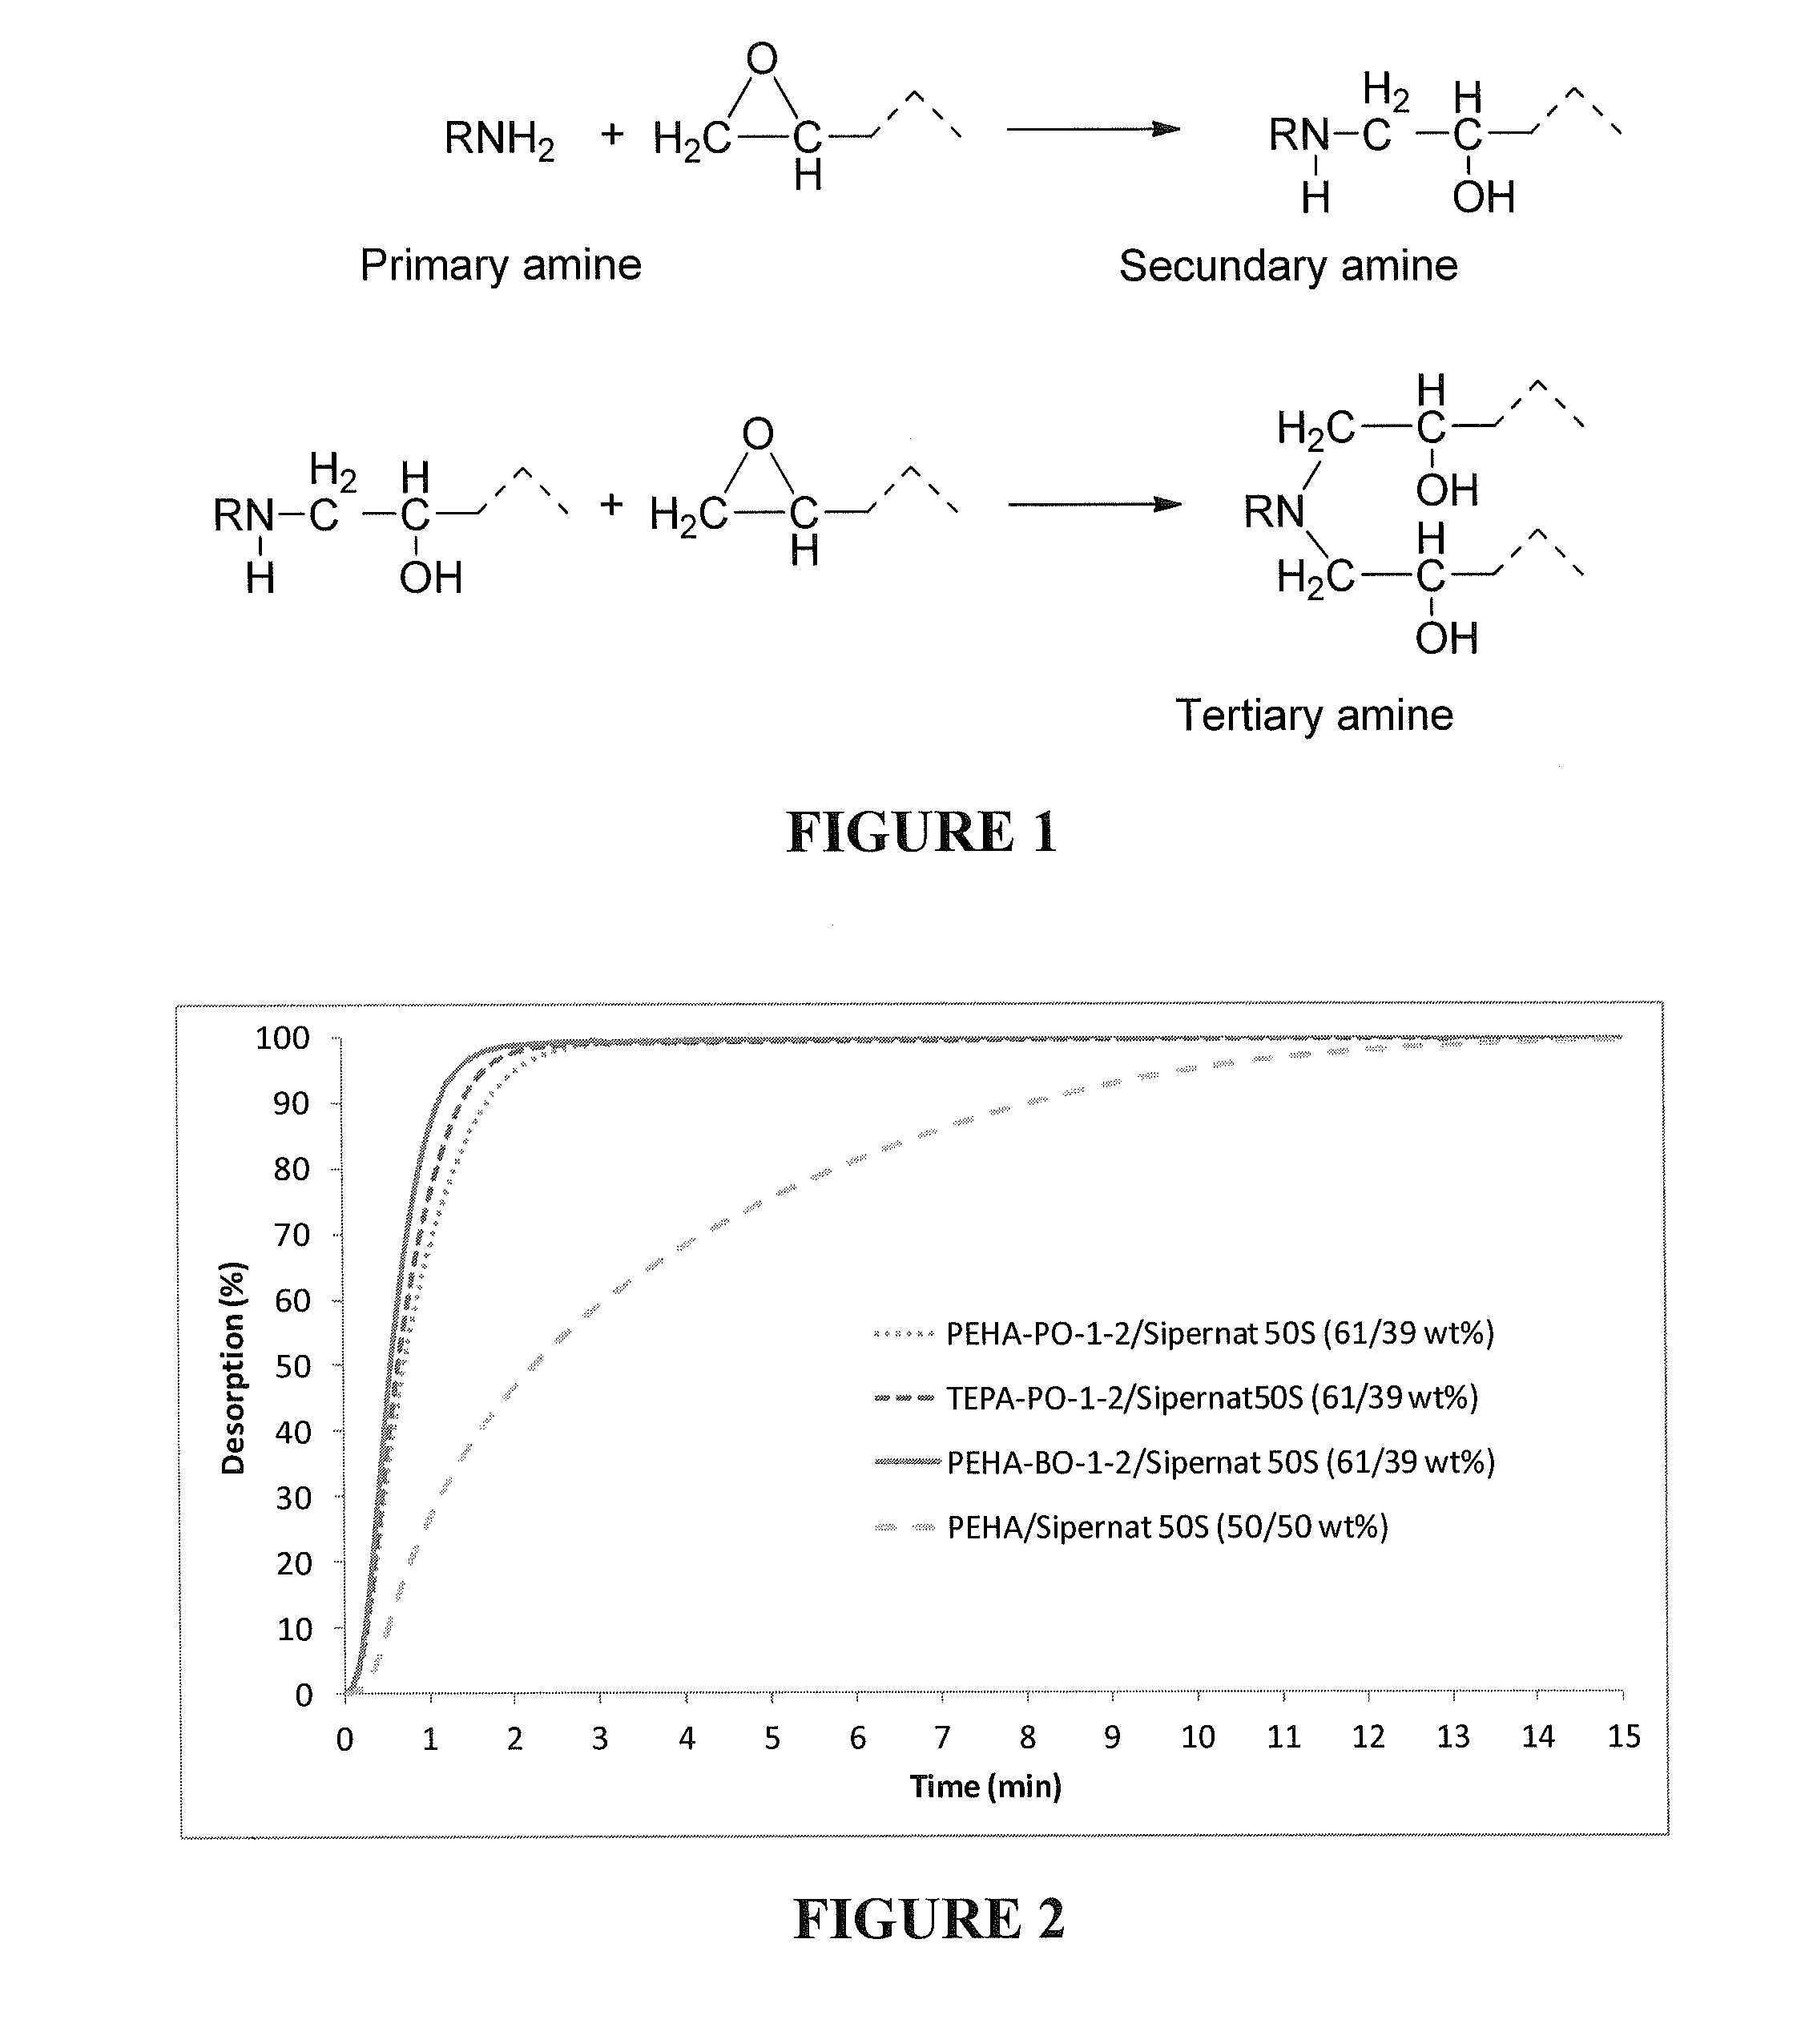 Regenerative adsorbents of modified amines on solid supports